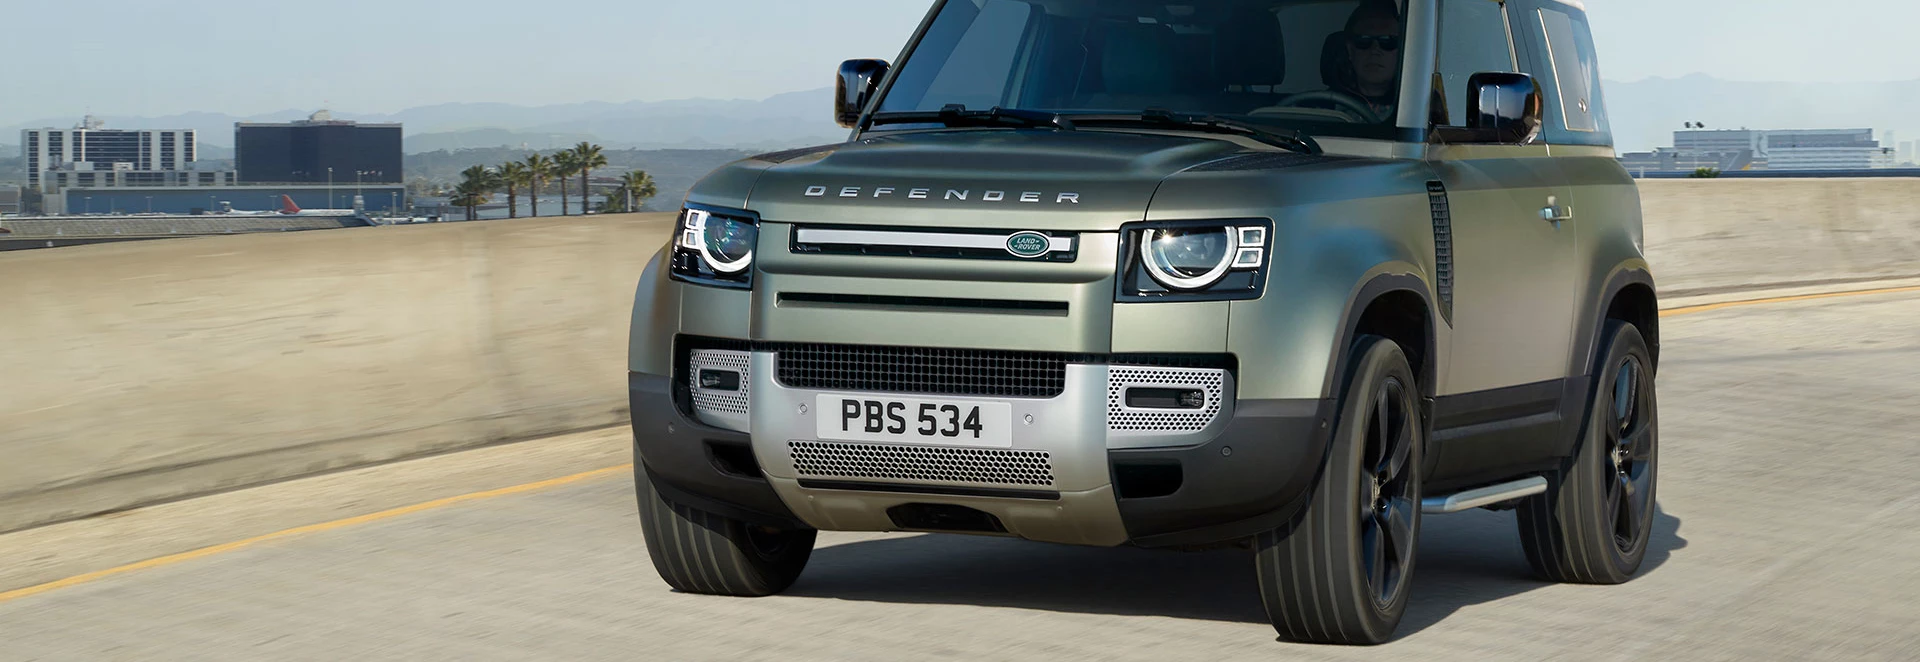 Land Rover Defender Prices